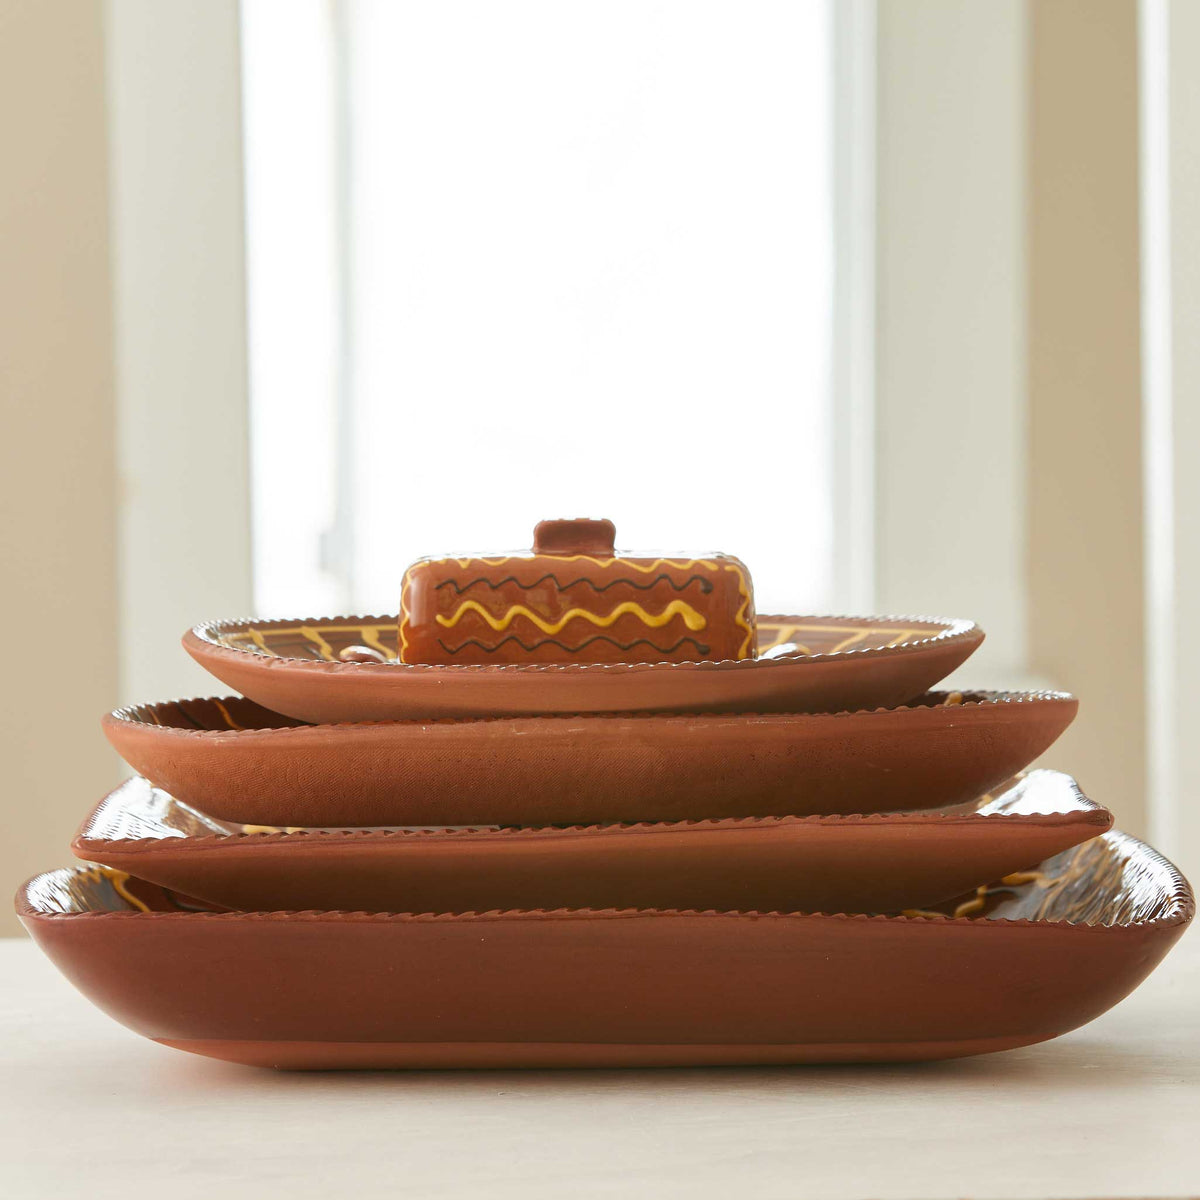 LIIMITED EDITION REDWARE SERVING PIECES